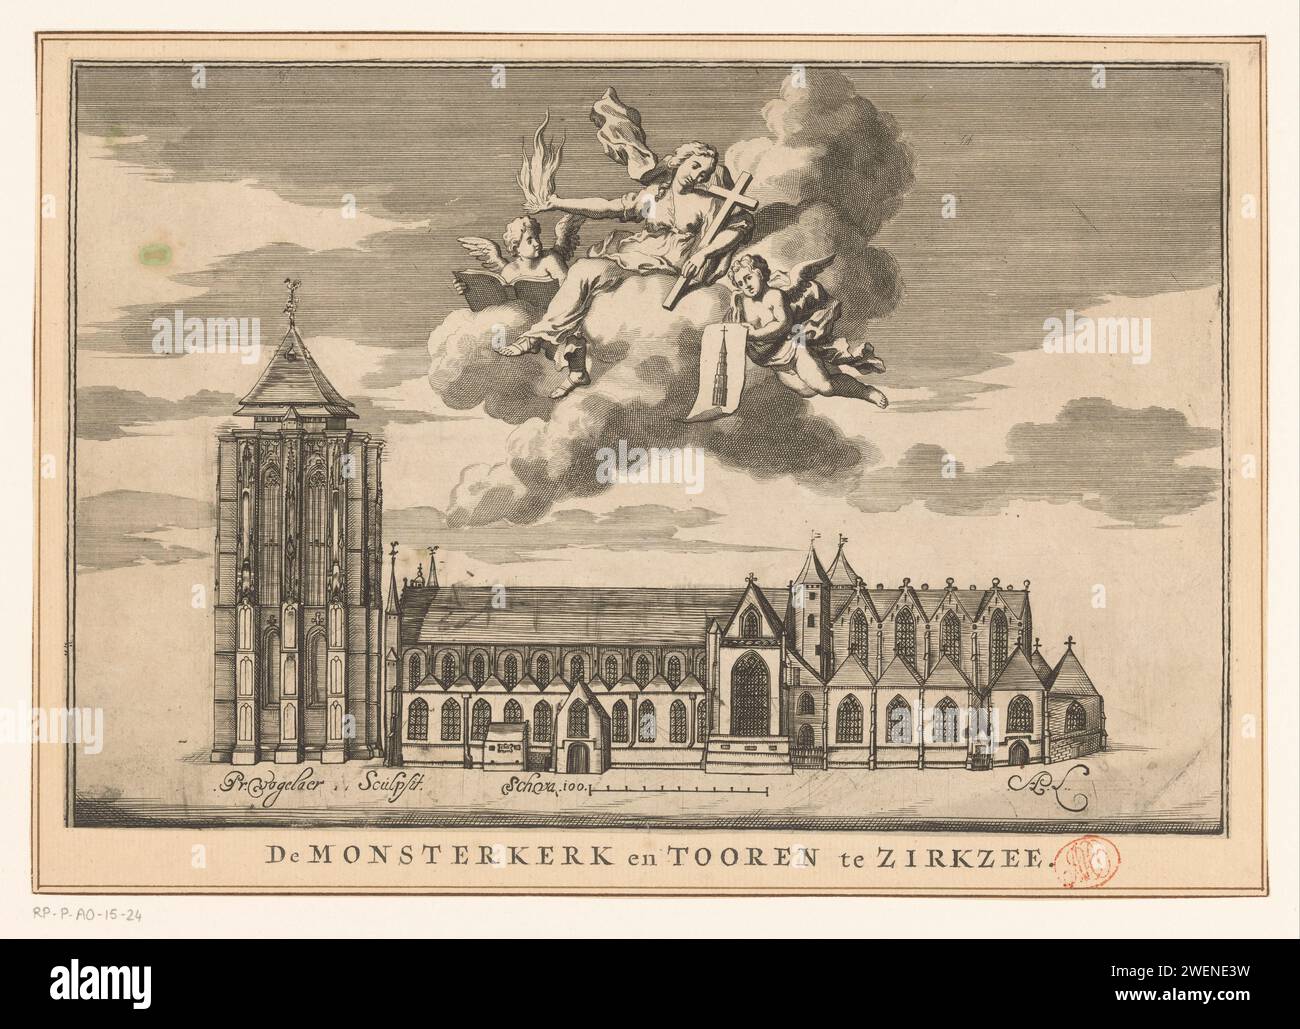 View of the Sint -Liefen Monster Tower and Church in Zierikzee, Pieter Vogelaer, in Or Before 1696 print View of the Sint -Liefen Monster tower and church in Zierikzee. In the sky, between the clouds, an allegorical female figure with a flame on her hand and a crucifix, flanked by two angels, with a drawing of a tower and a book.  paper. ink engraving / etching / pen church (exterior) Sint-Lievensmonsterkerk. Sint-Lievens Monster Tower Stock Photo